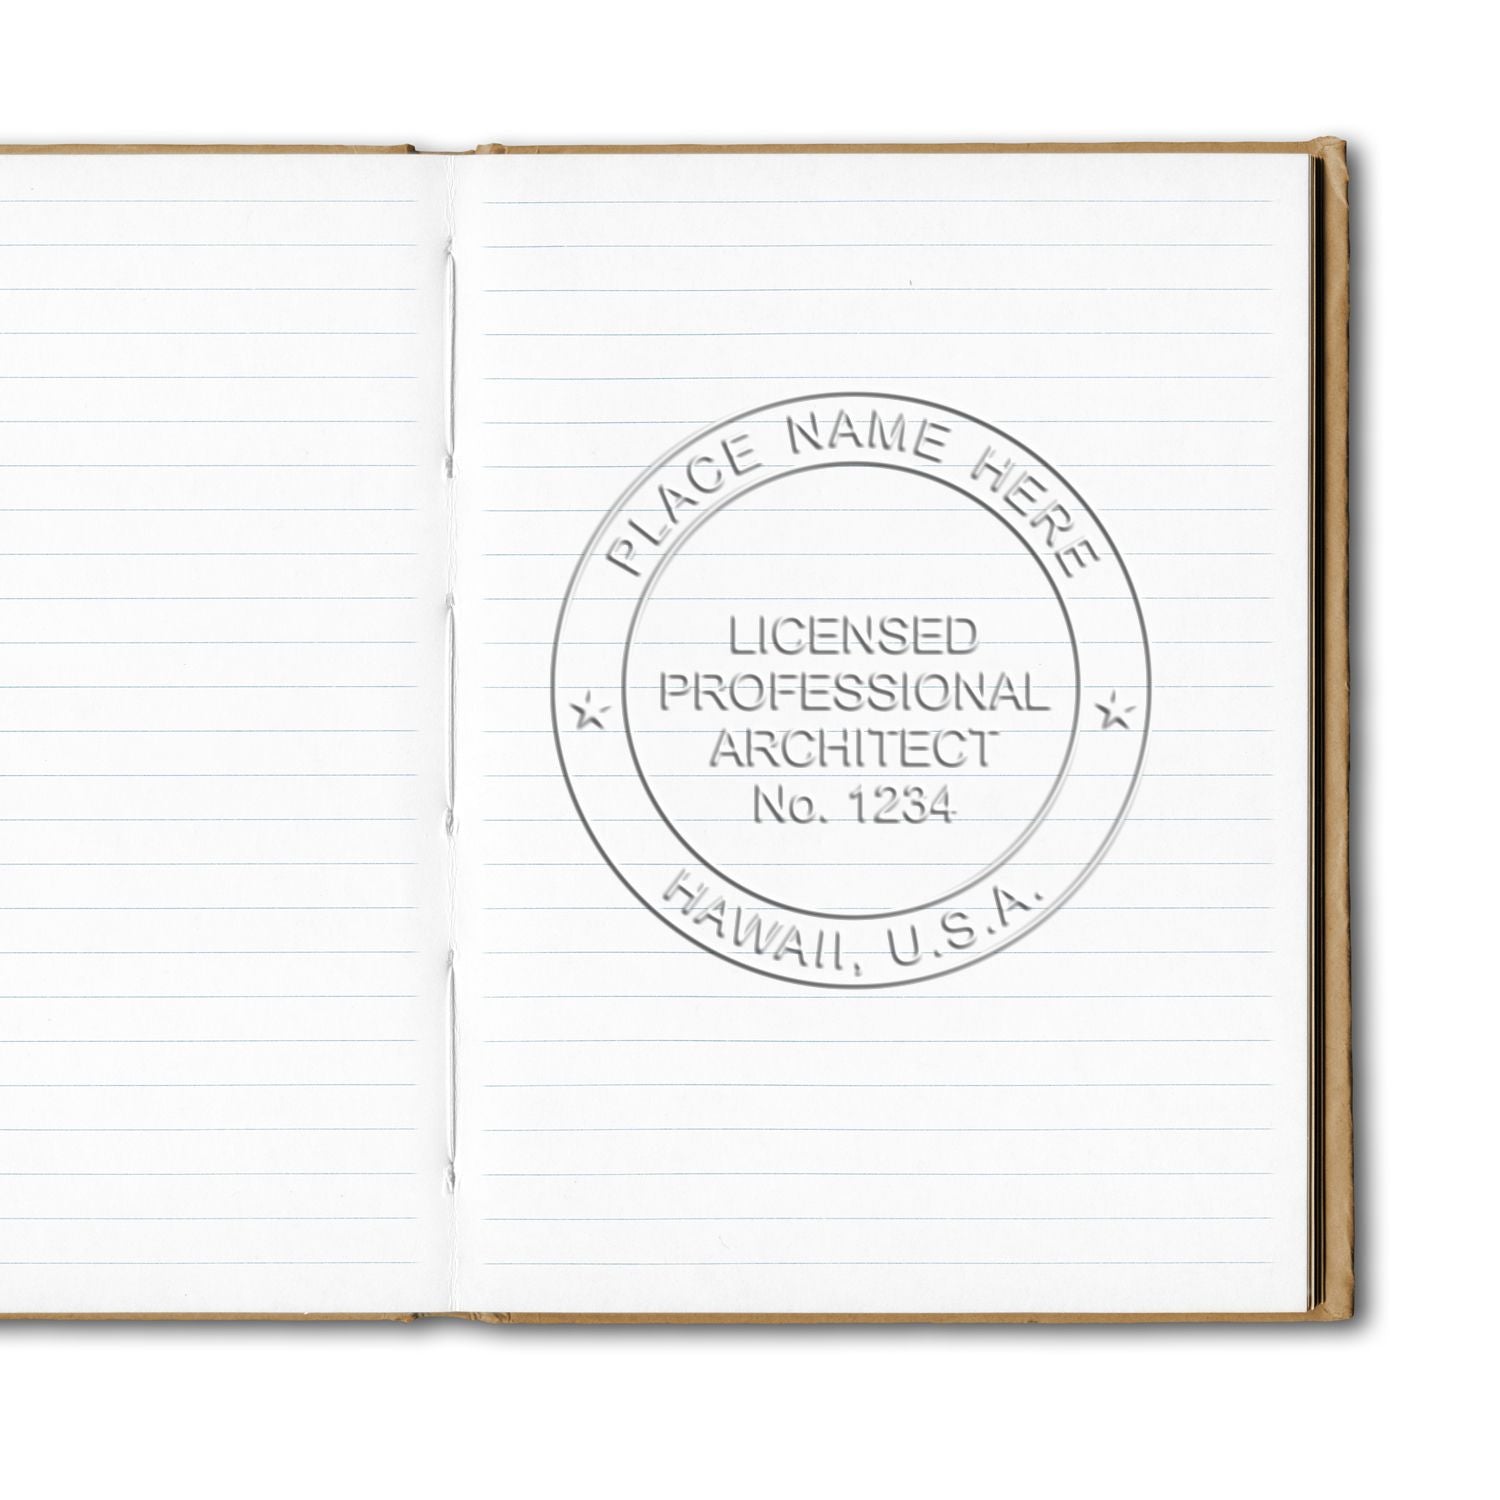 The Hawaii Desk Architect Embossing Seal stamp impression comes to life with a crisp, detailed photo on paper - showcasing true professional quality.